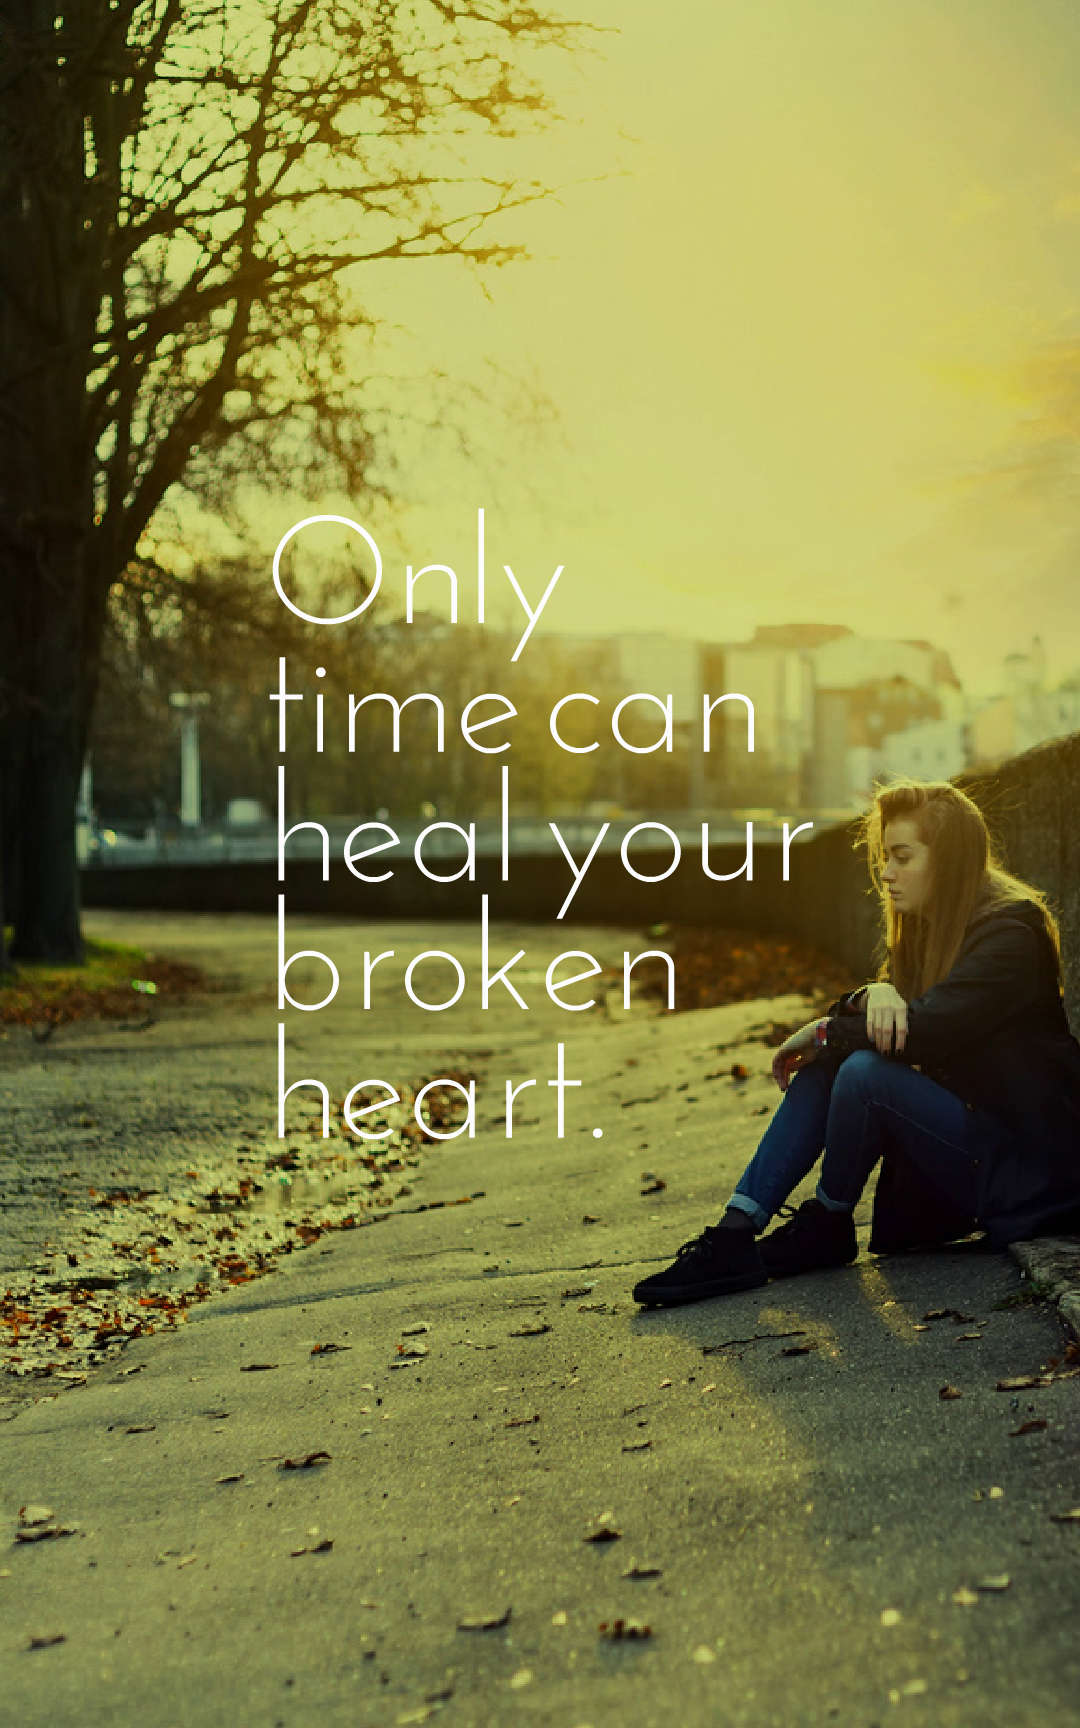 60 Broken Heart Quotes And Sayings With Images